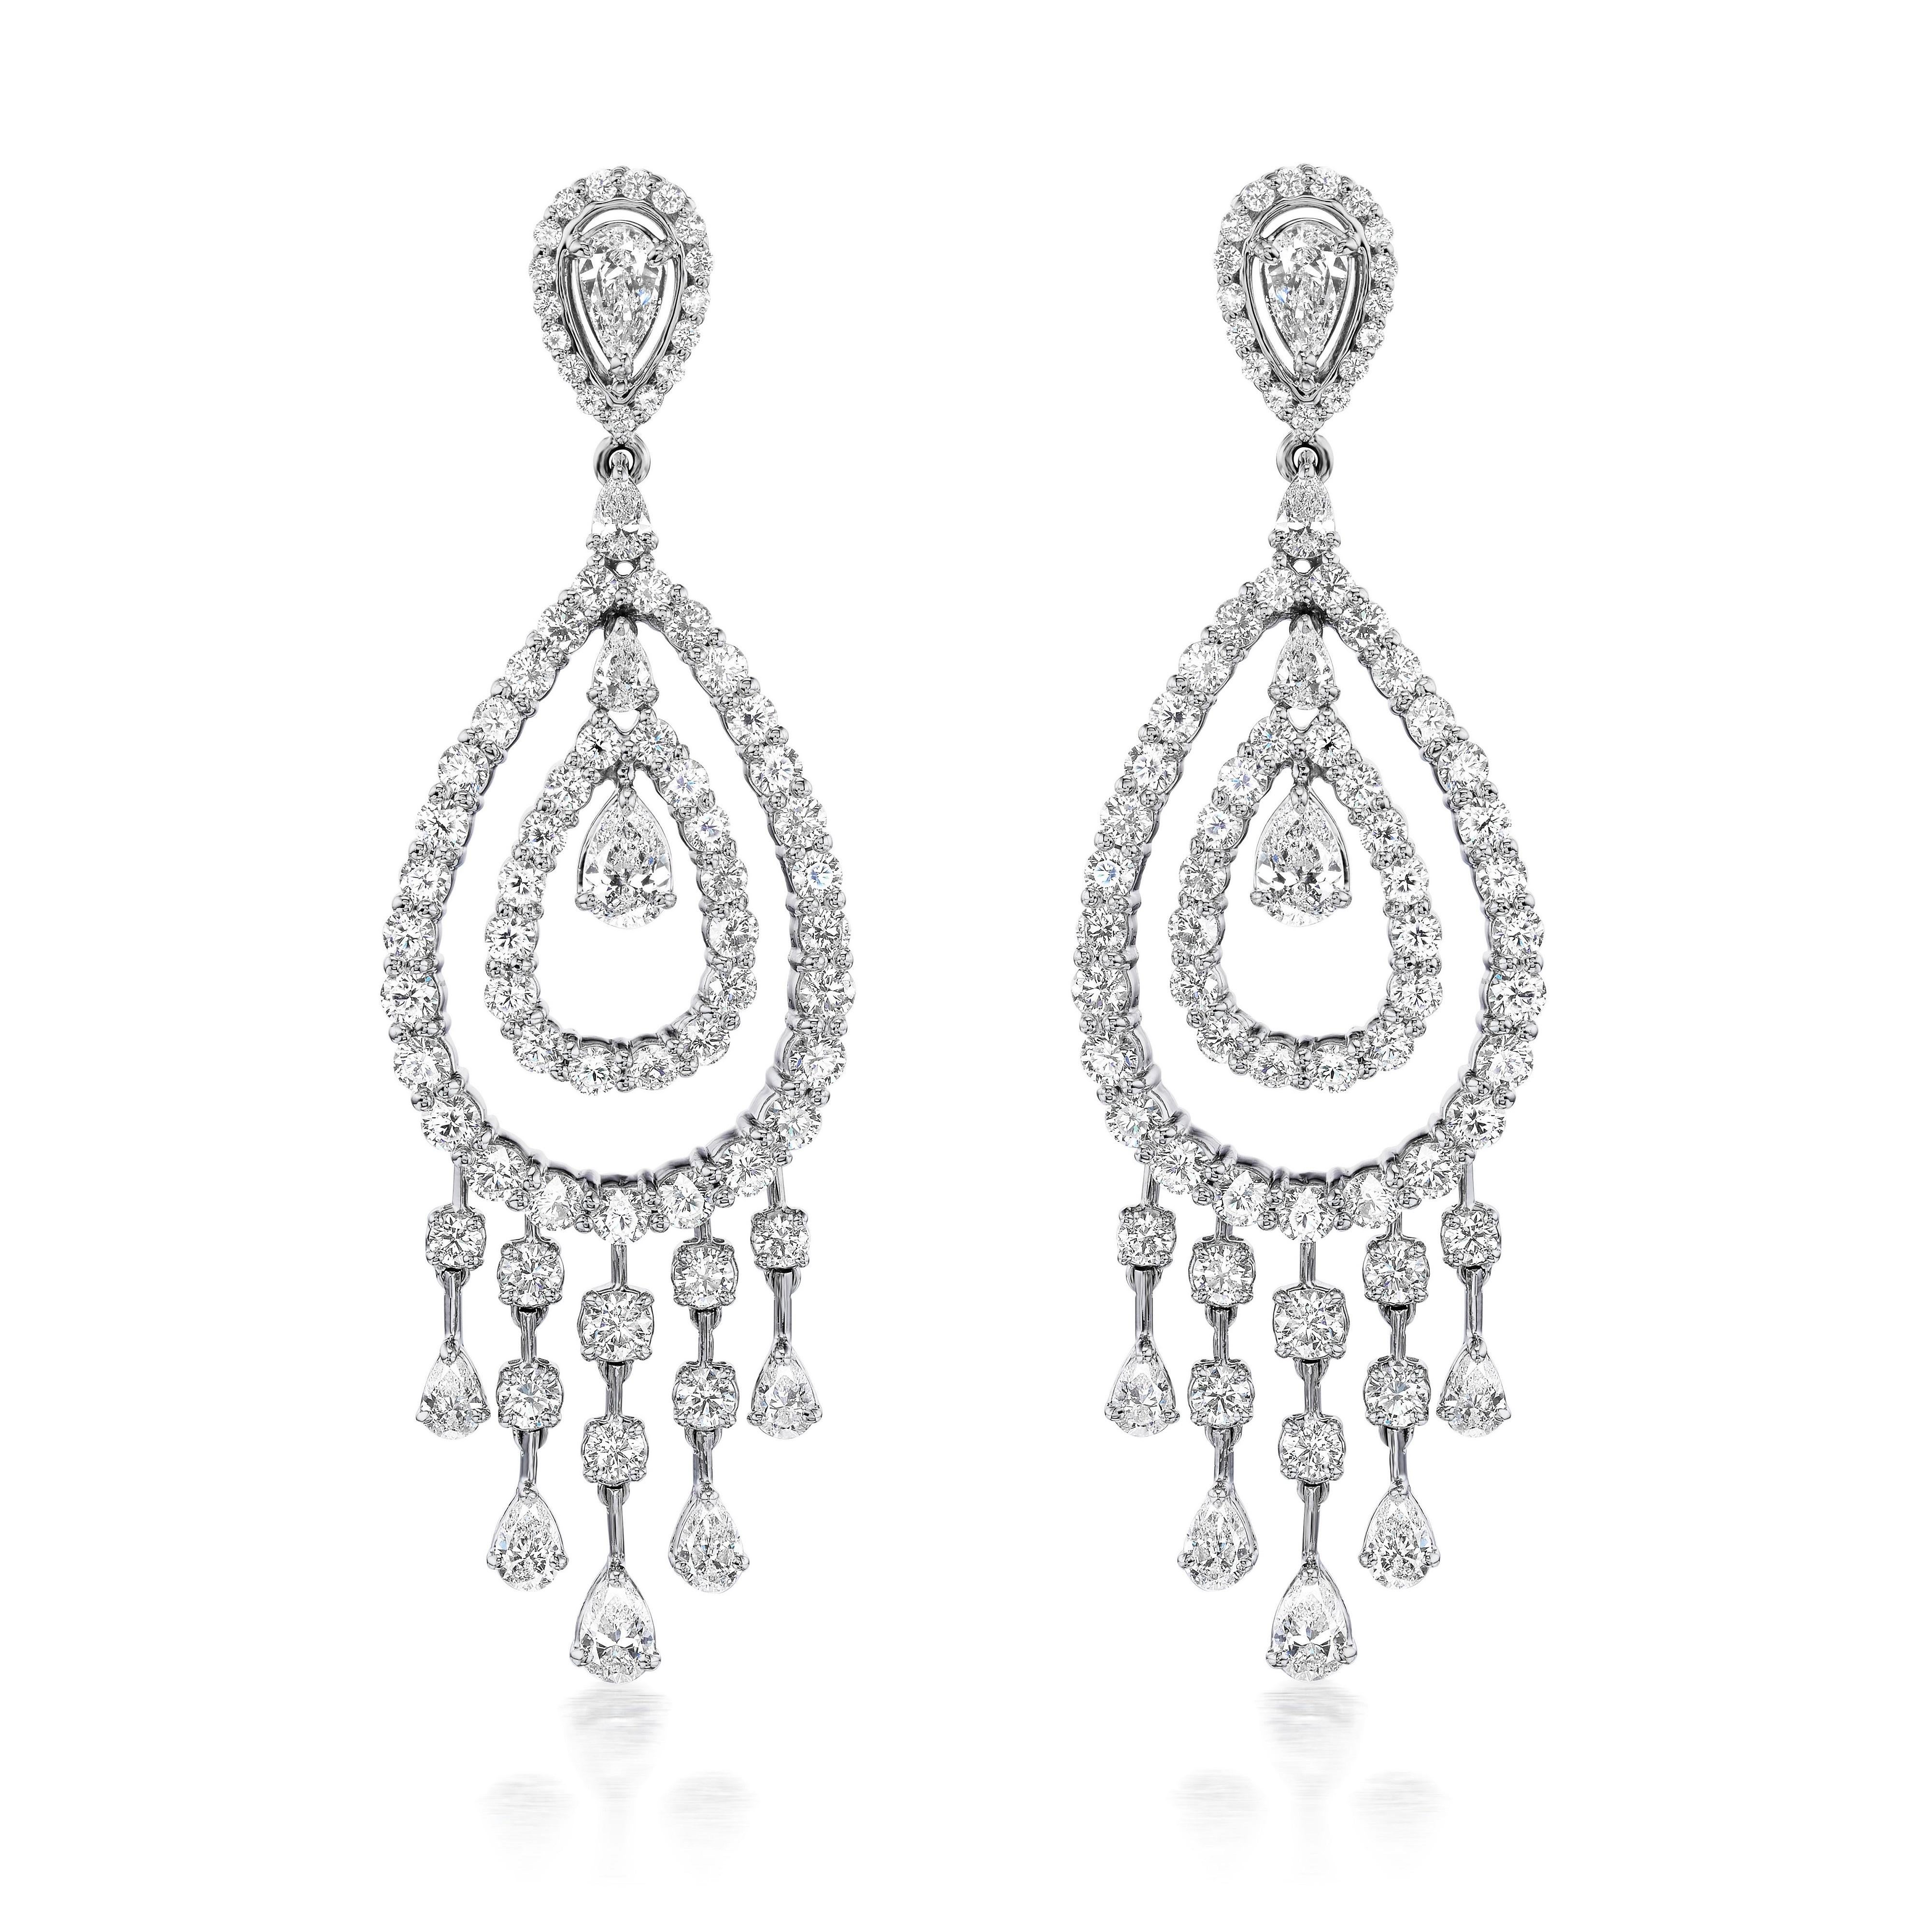 Contemporary Beauvince Rain Diamond Earrings '15.01 Ct Diamonds' in White Gold For Sale